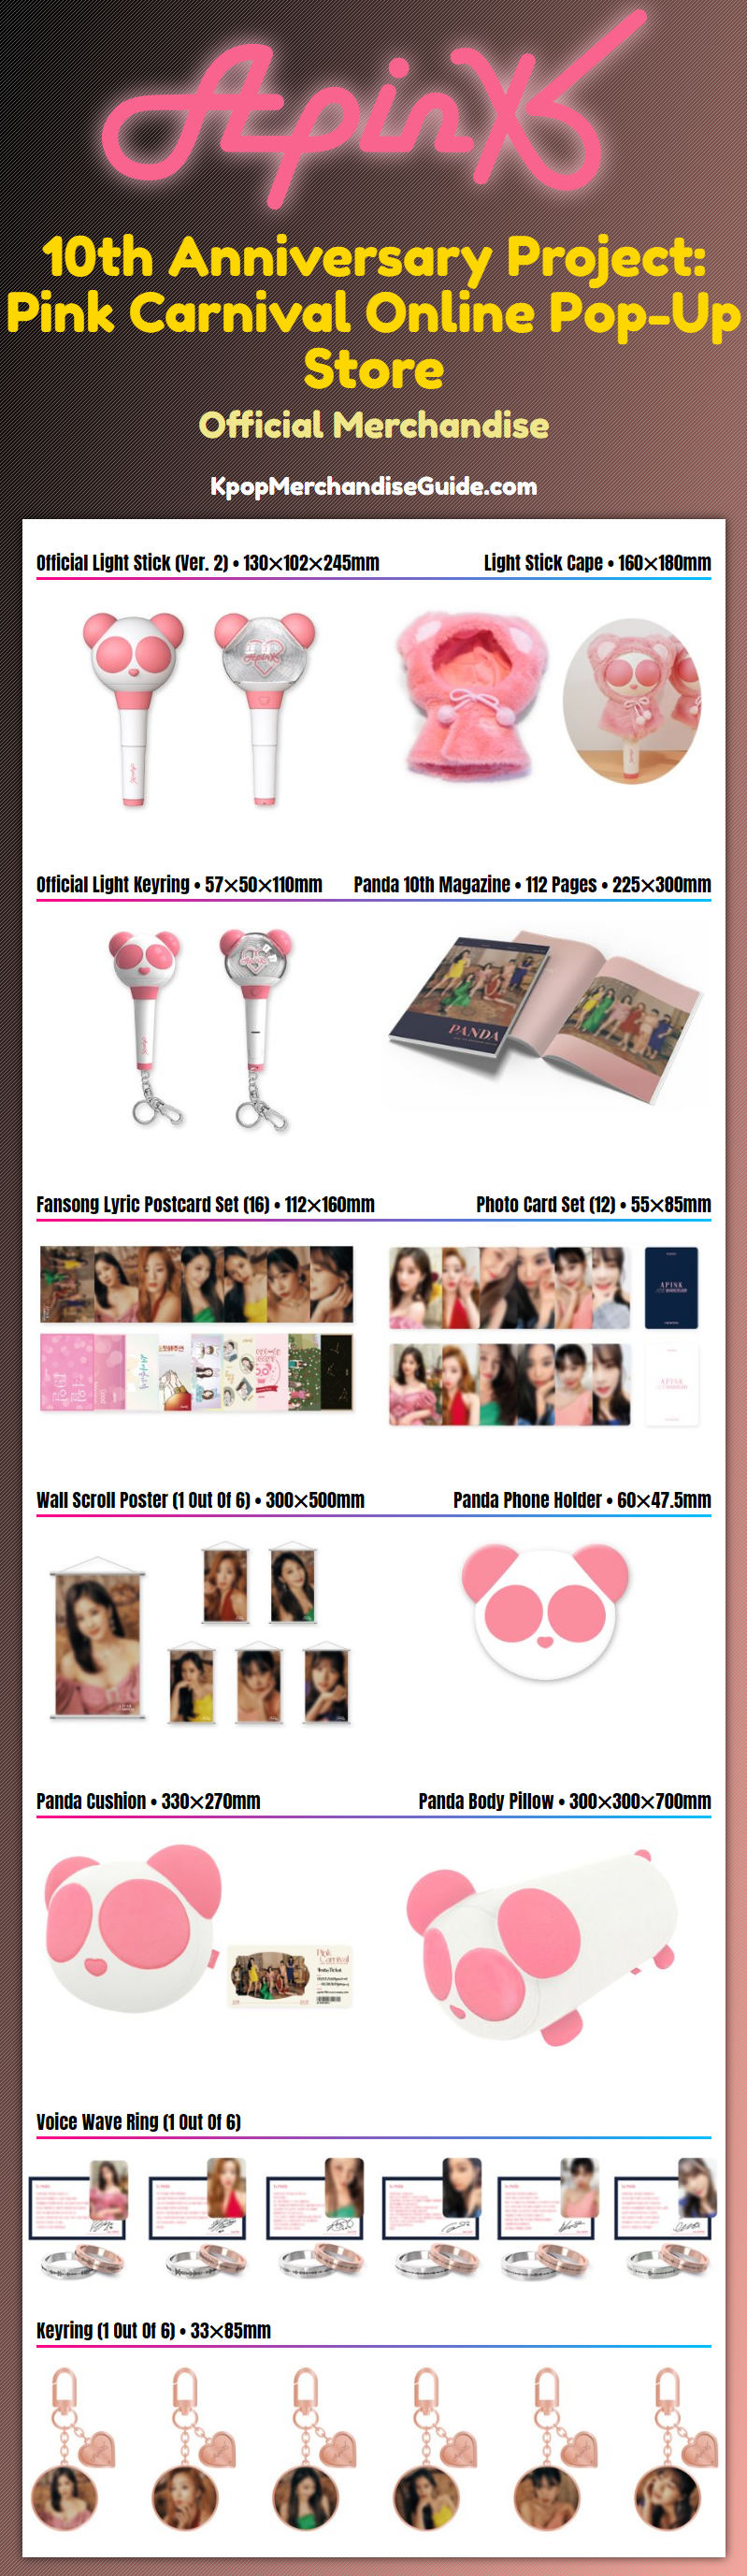 Apink 10th Anniversary Project: Pink Carnival Online Pop-Up Store Merchandise